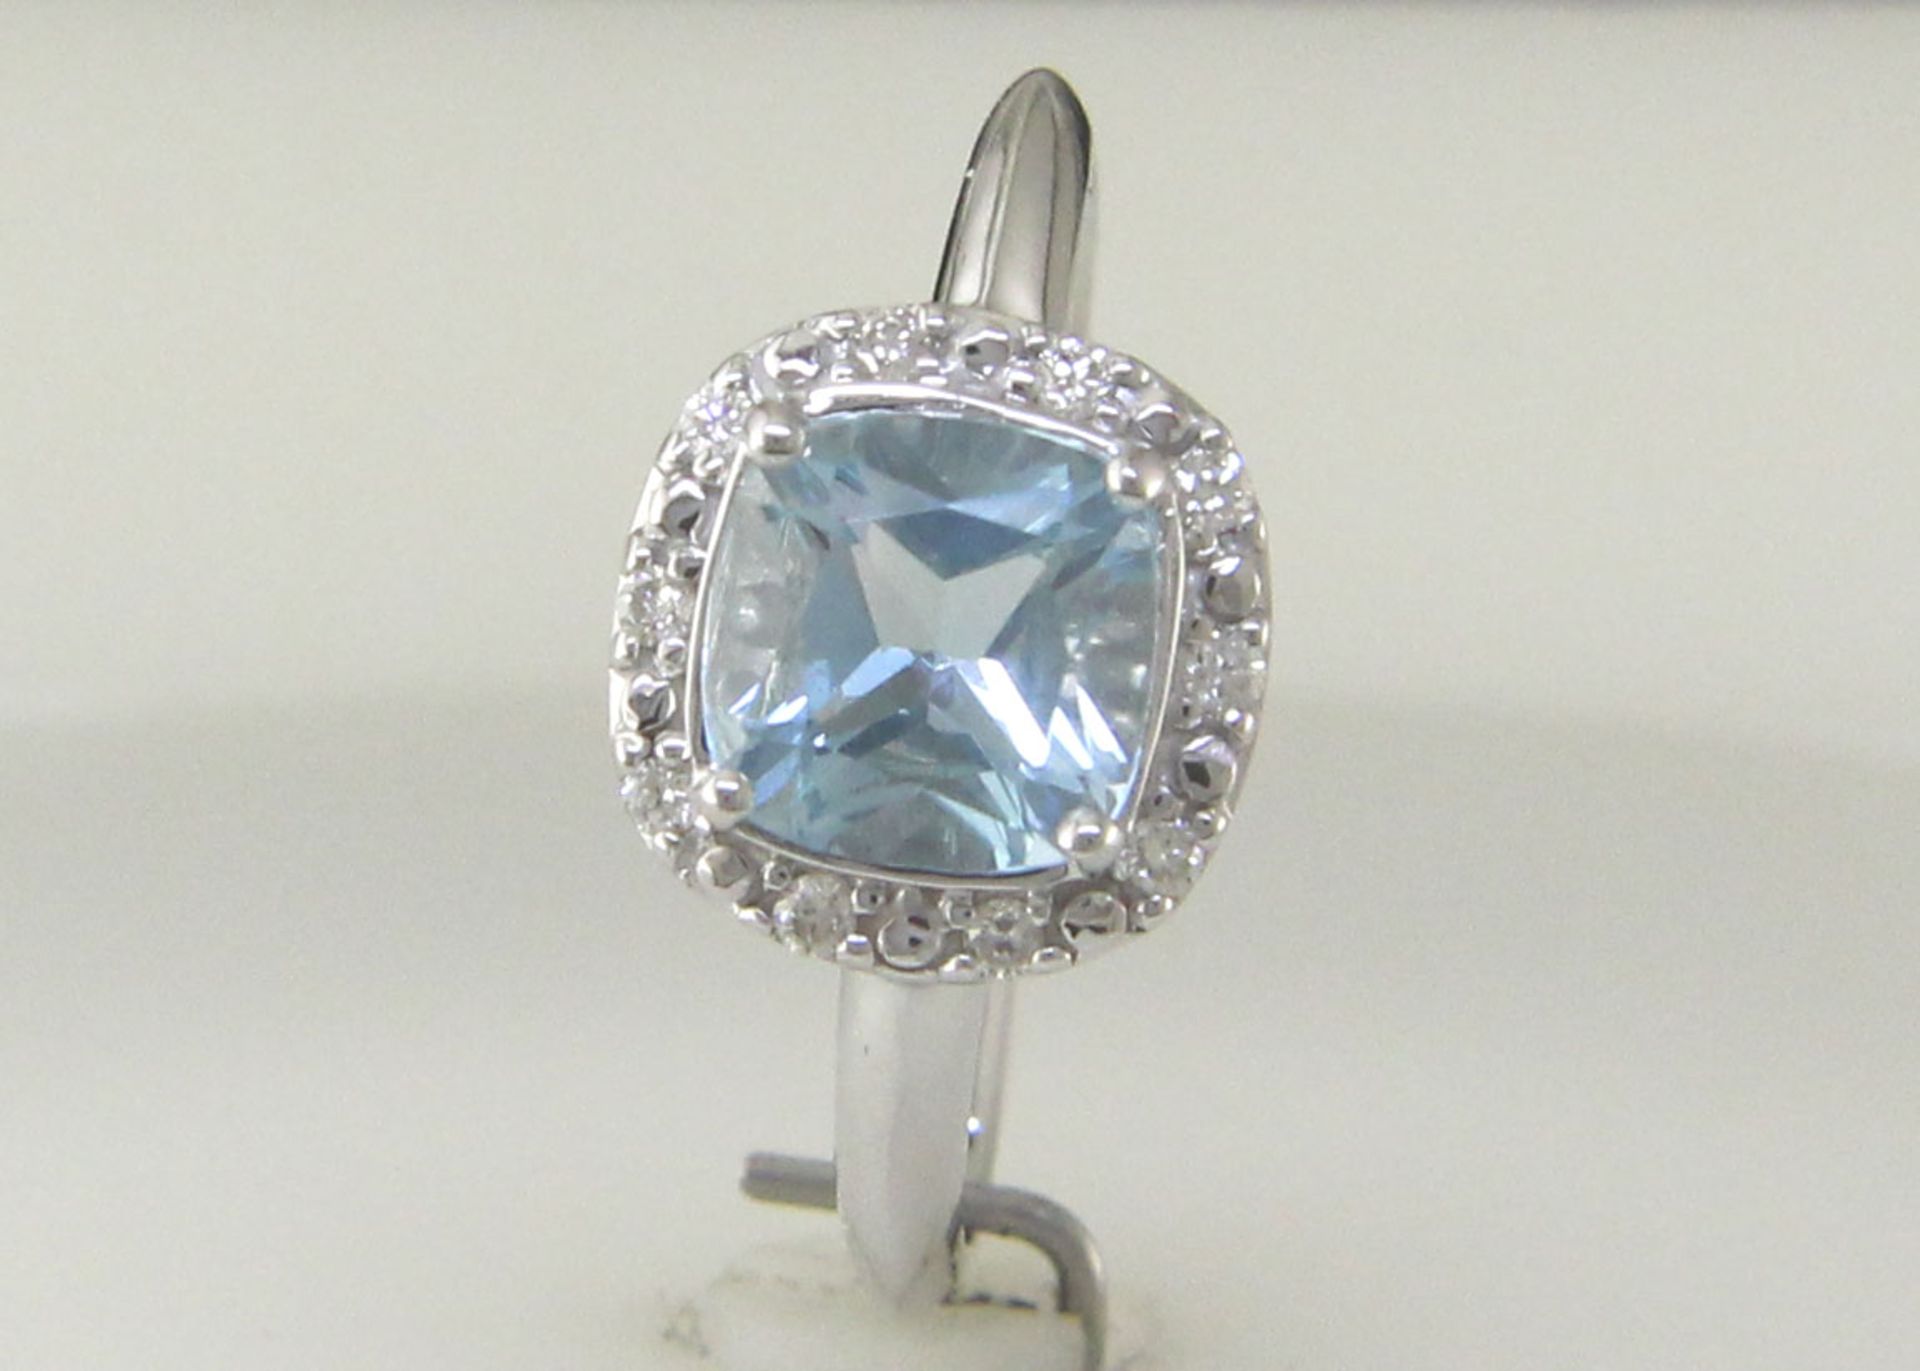 9ct White Gold Diamond And Blue Topaz Ring 0.10 Carats - Valued by GIE £1,920.00 - A stunning - Image 8 of 9